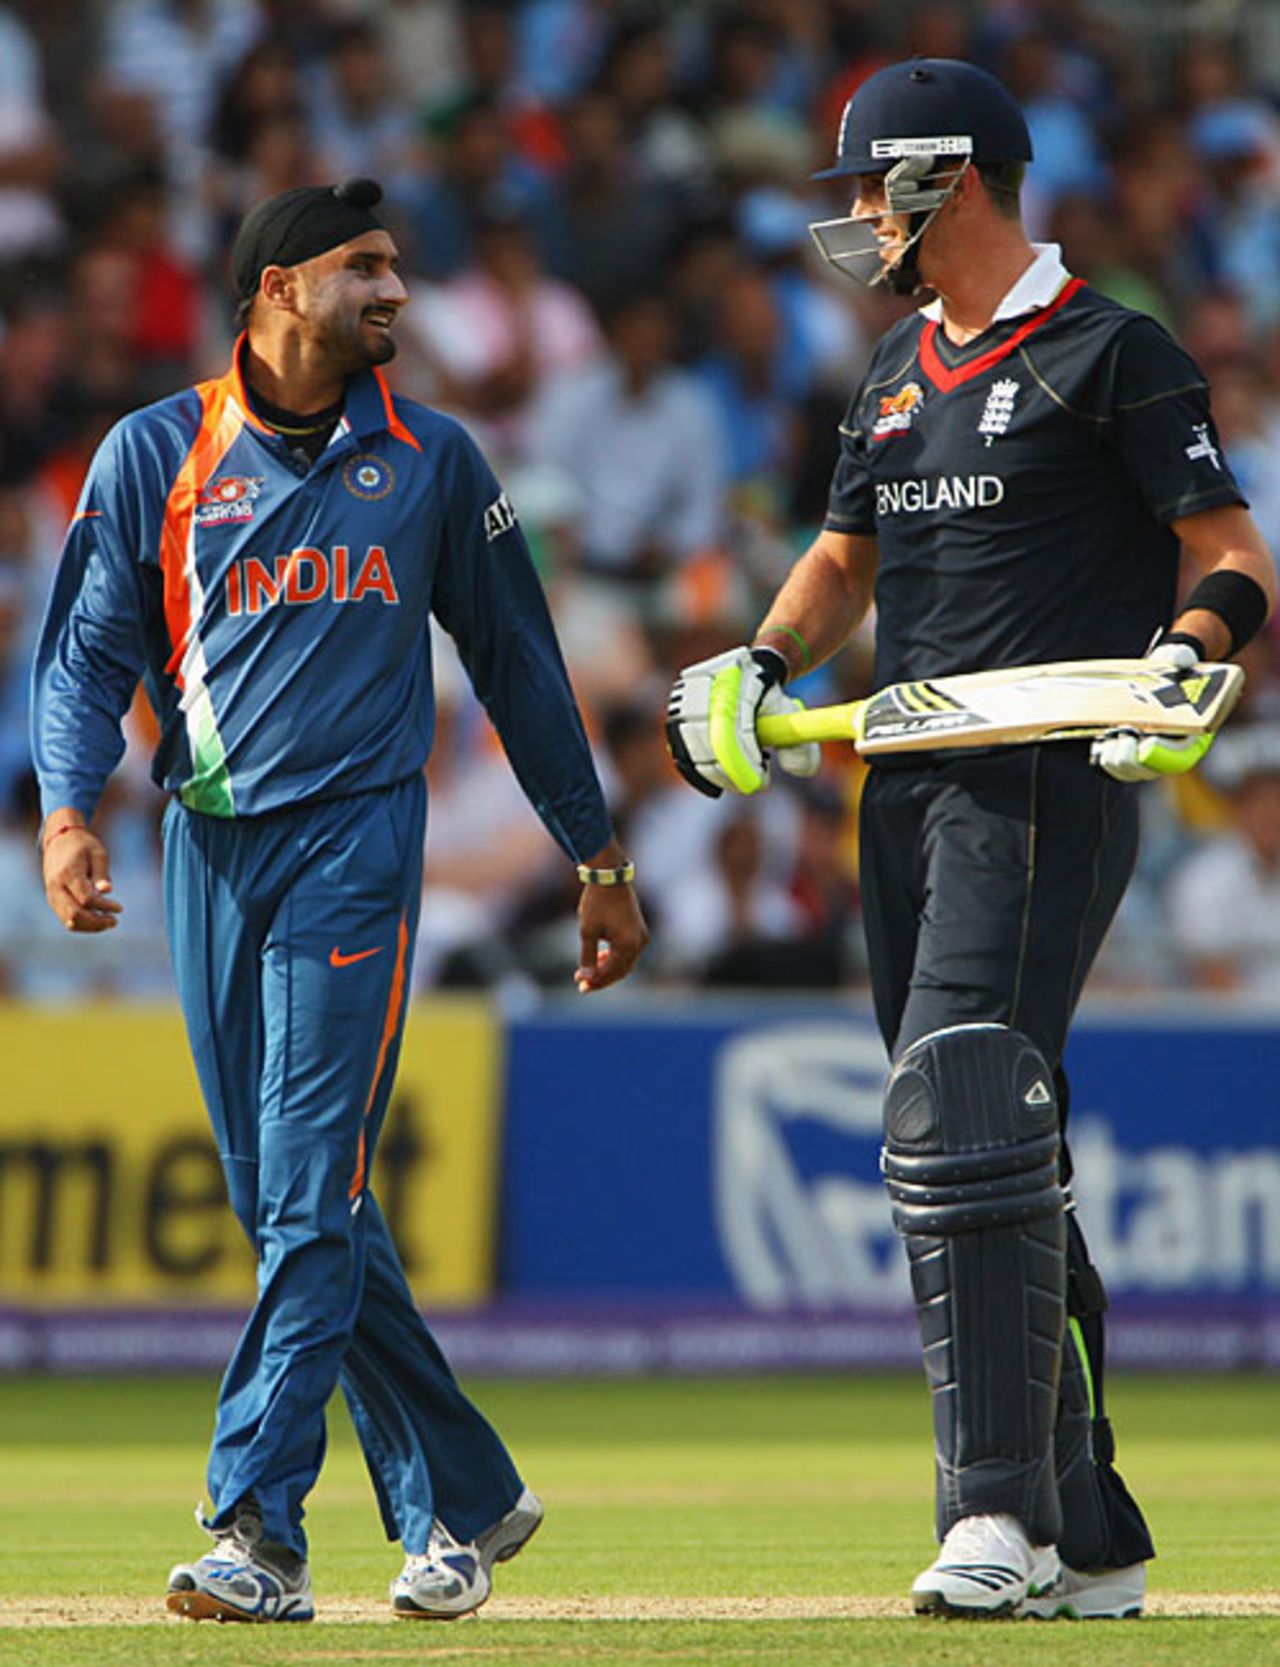 Harbhajan Singh and Kevin Pietersen share a joke after the bowler stopped short in his run-up on seeing the batsman try a switch hit, England v India, ICC World Twenty20 Super Eights, Lord's, June 14, 2009 